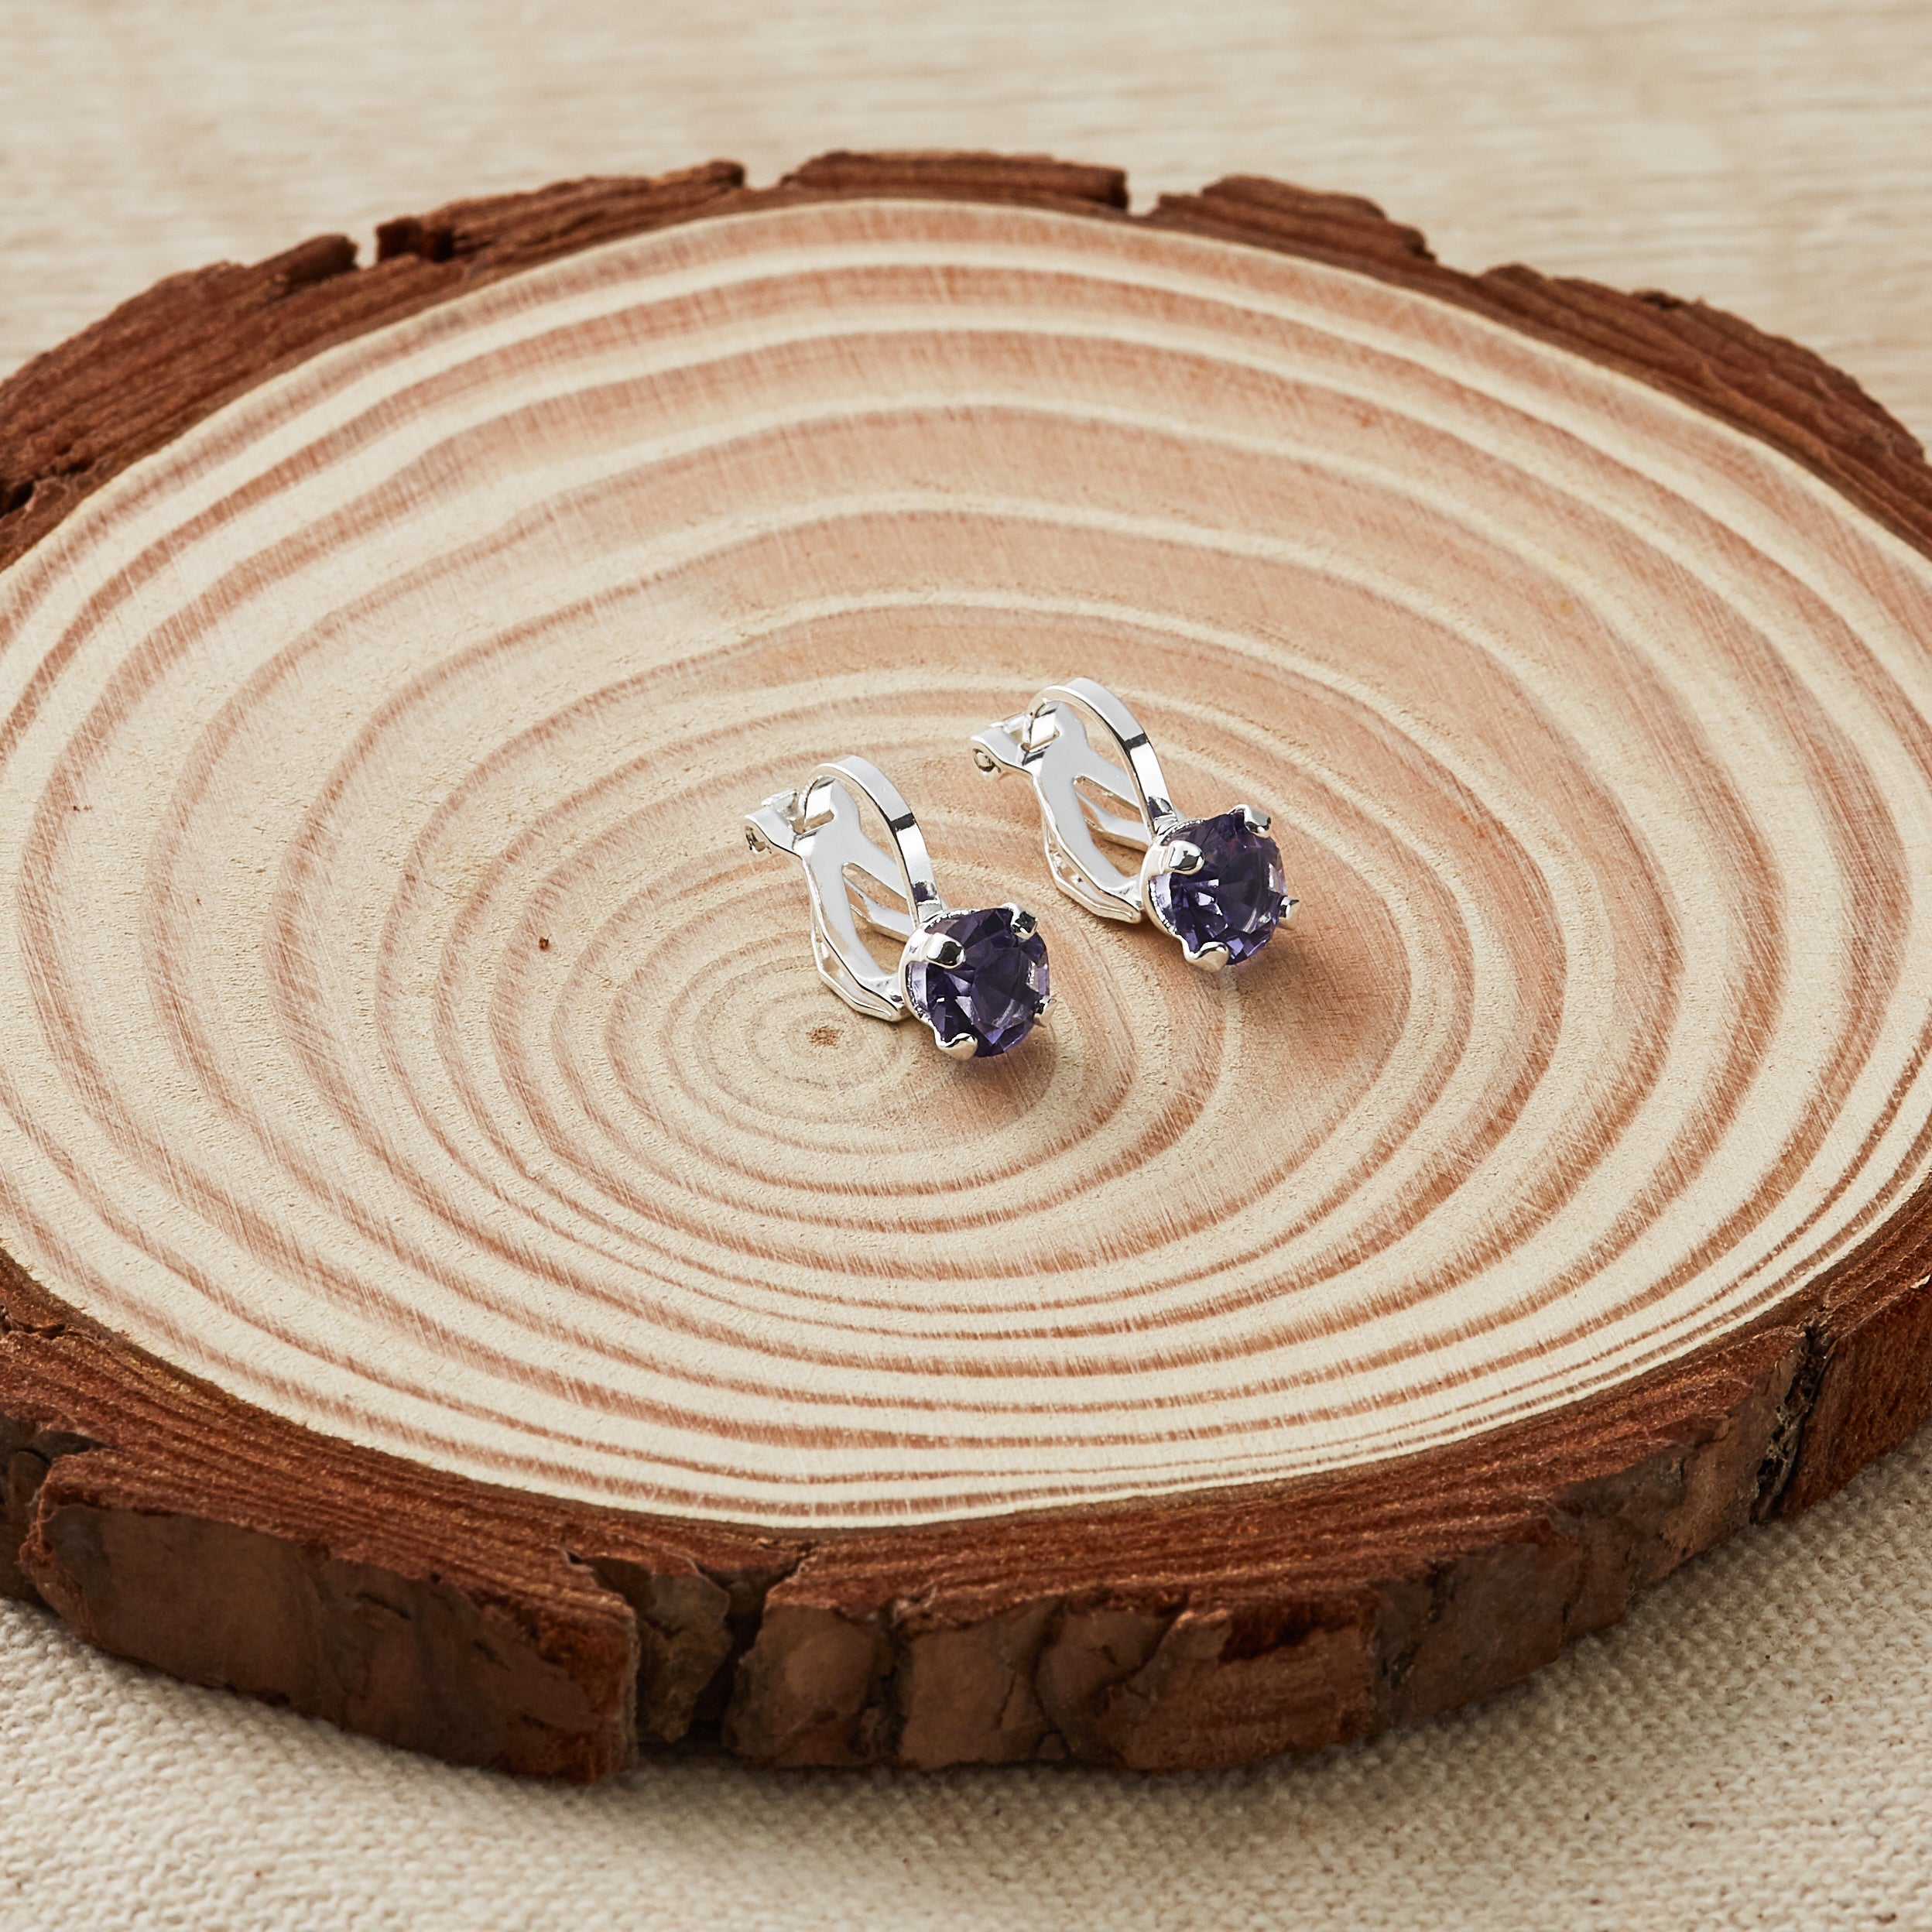 February (Amethyst) Birthstone Clip On Earrings Created with Zircondia® Crystals